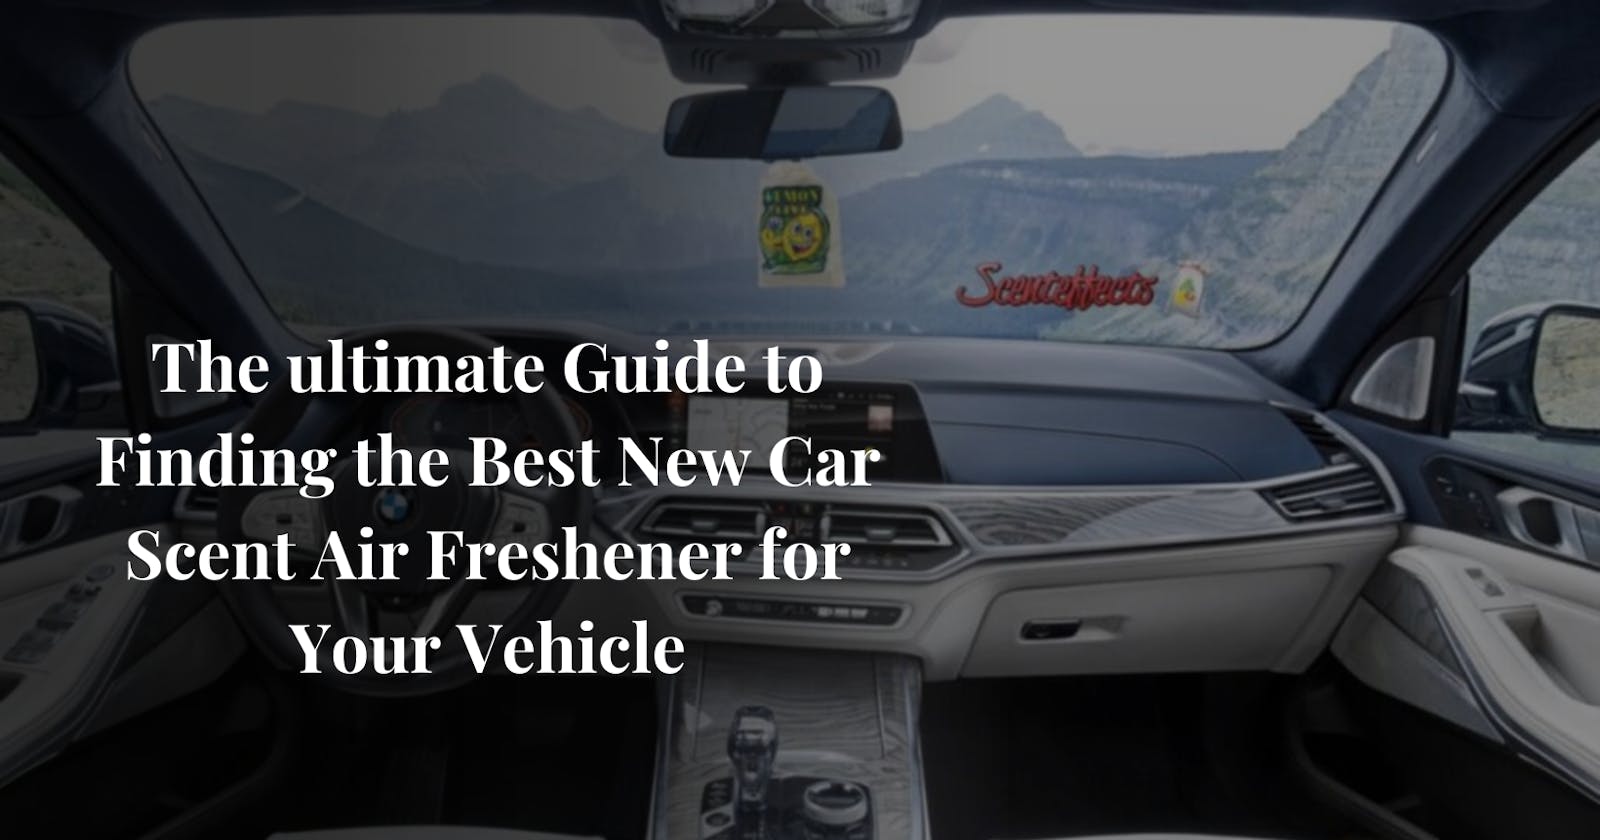 The ultimate Guide to Finding the Best New Car Scent Air Freshener for Your Vehicle